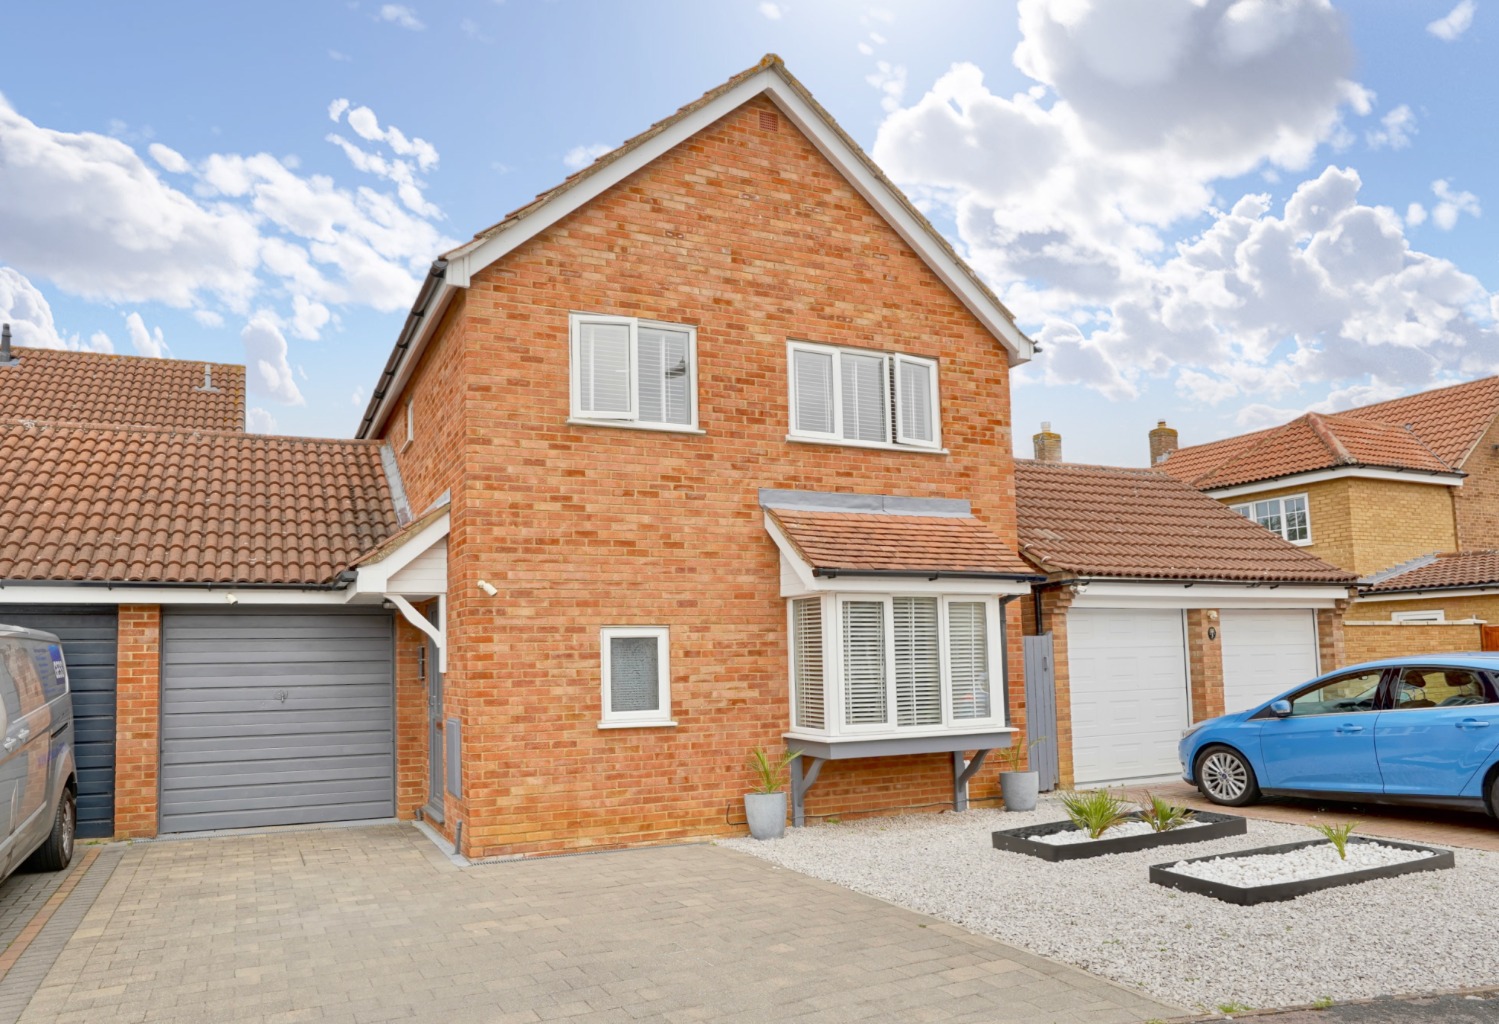 4 bed detached house for sale in Sundew Close, St Neots  - Property Image 1